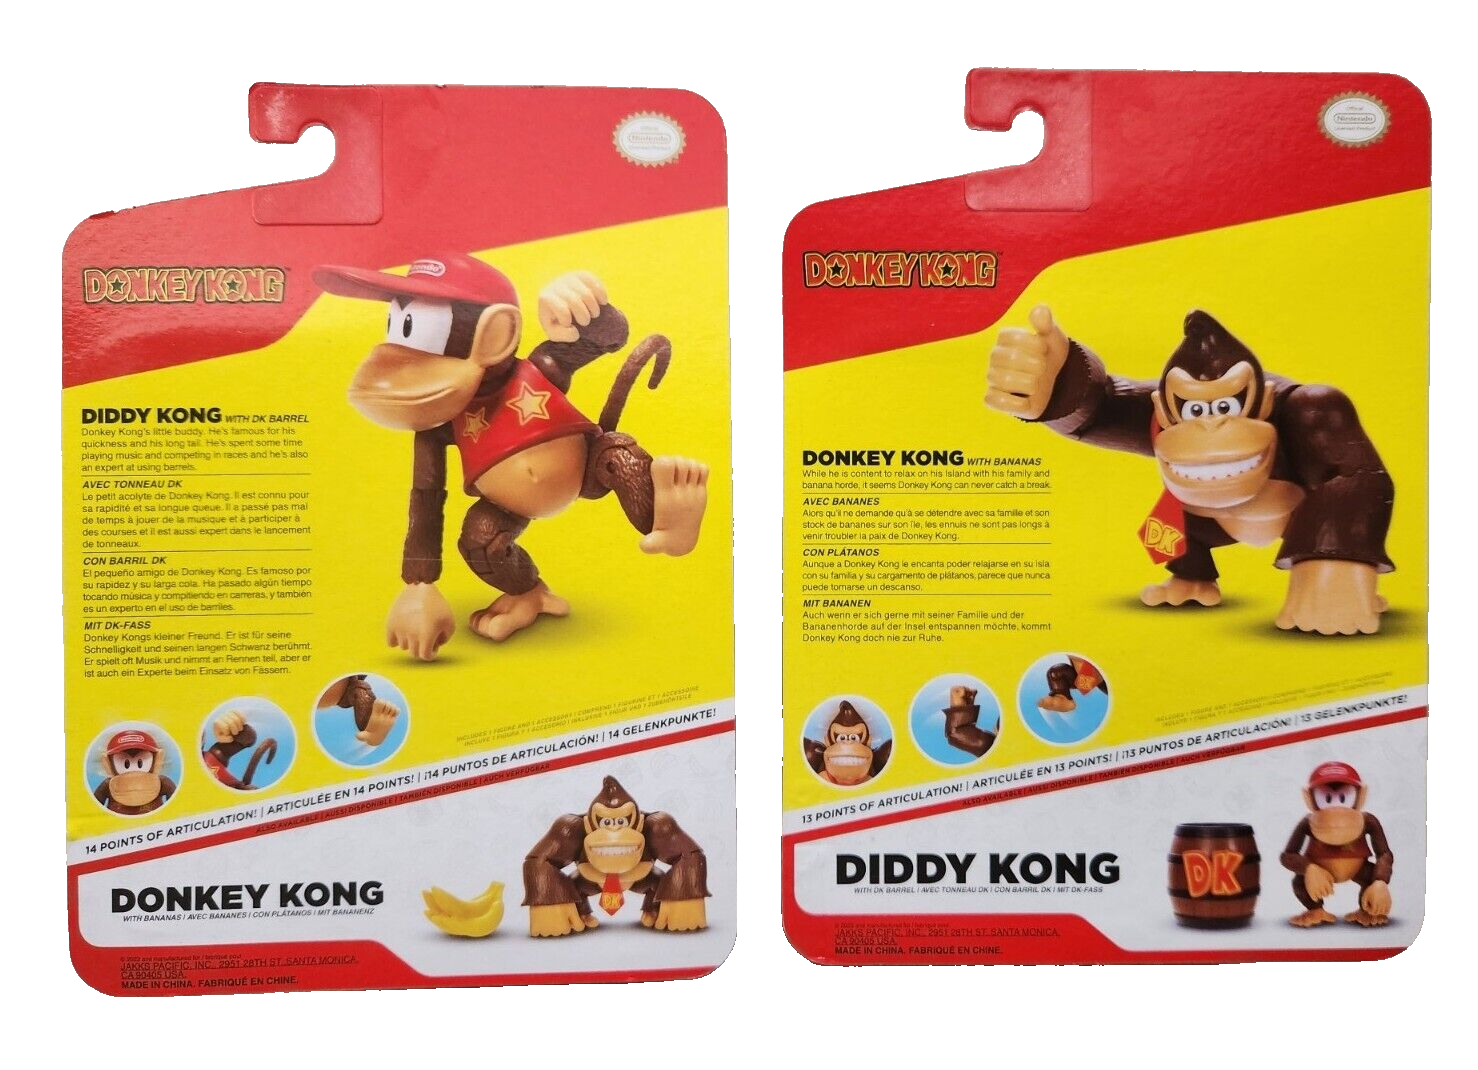 Donkey Kong with Bananas + Diddy Kong  with Barrel 4" Nintendo Jakks Pacific JAKKS Pacific JAKKS Pacific 4 Inch World Of Nintendo Donkey & Diddy Kong - фотография #4